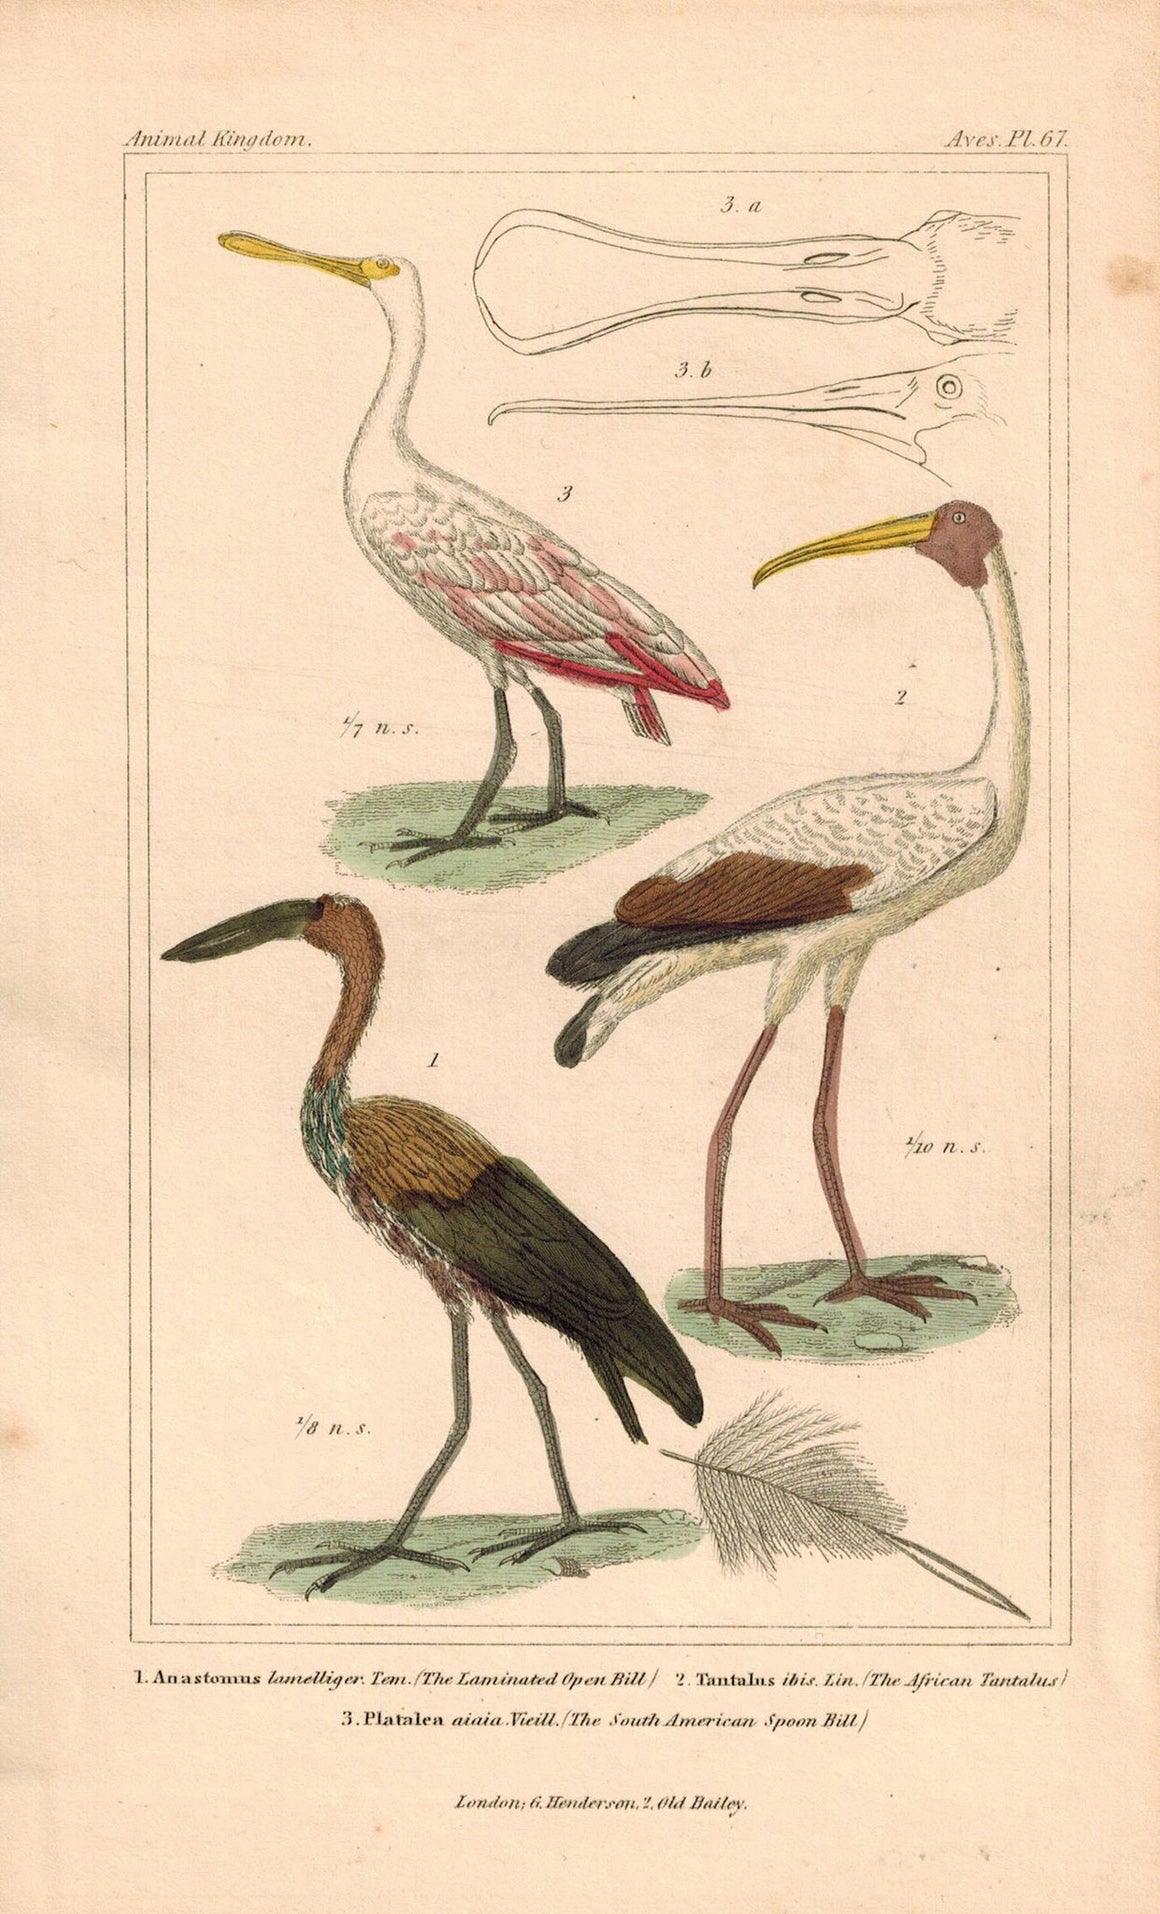 African Tantalus Spoon Bill Antique Hand Color Cuvier Bird Print 1837